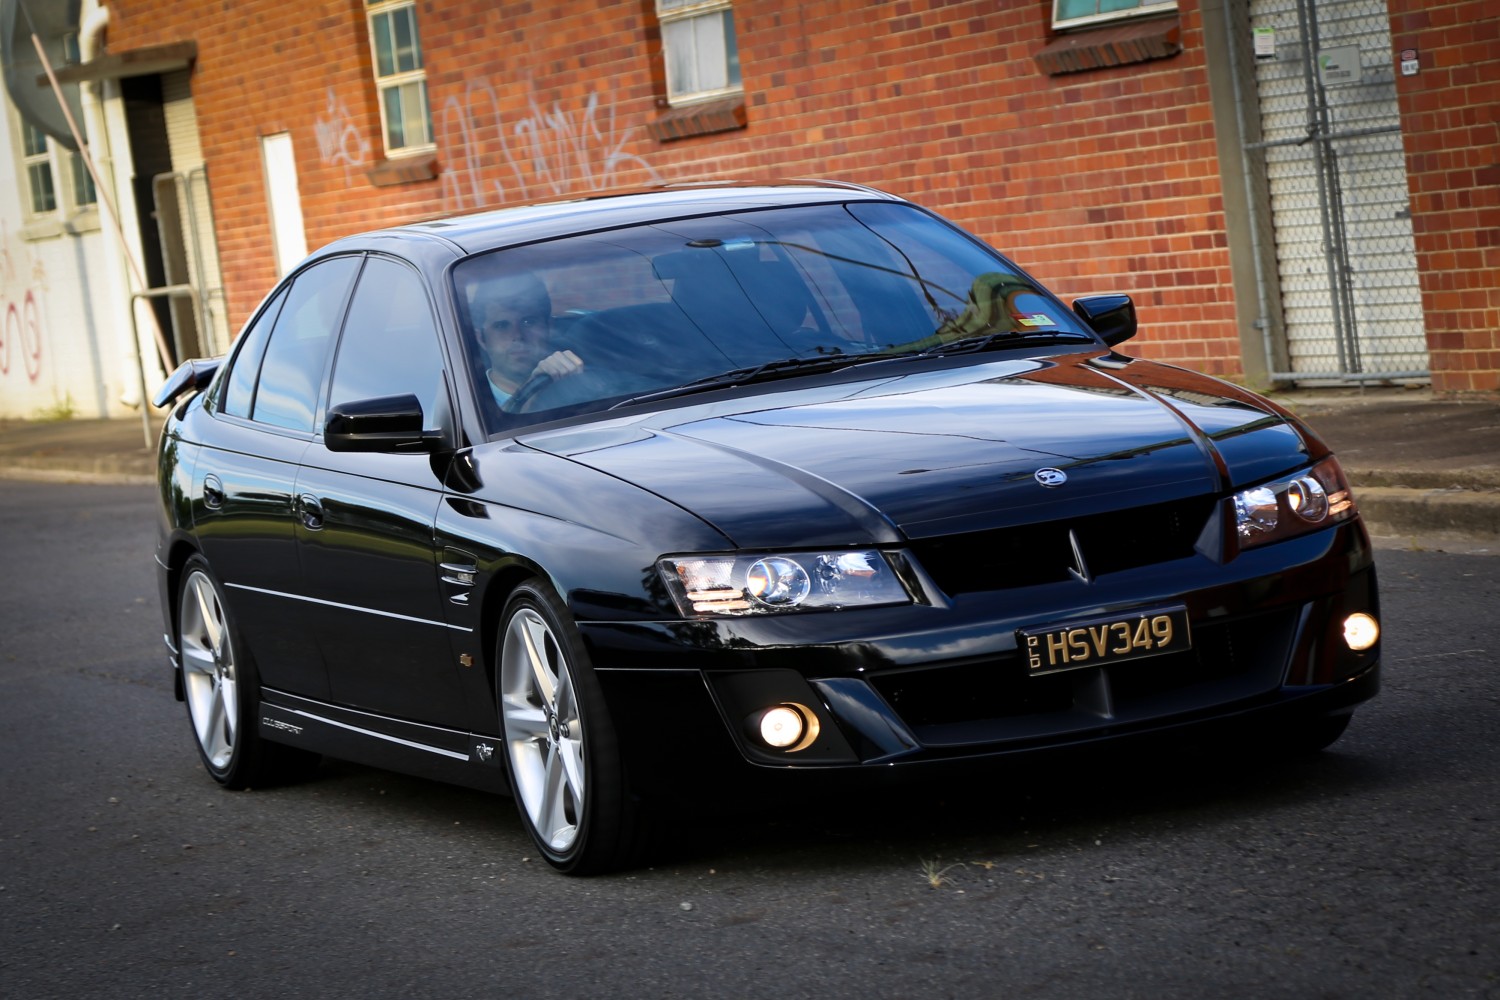 05 Holden Special Vehicles Vz Clubsport 21 Shannons Club Online Show Shine